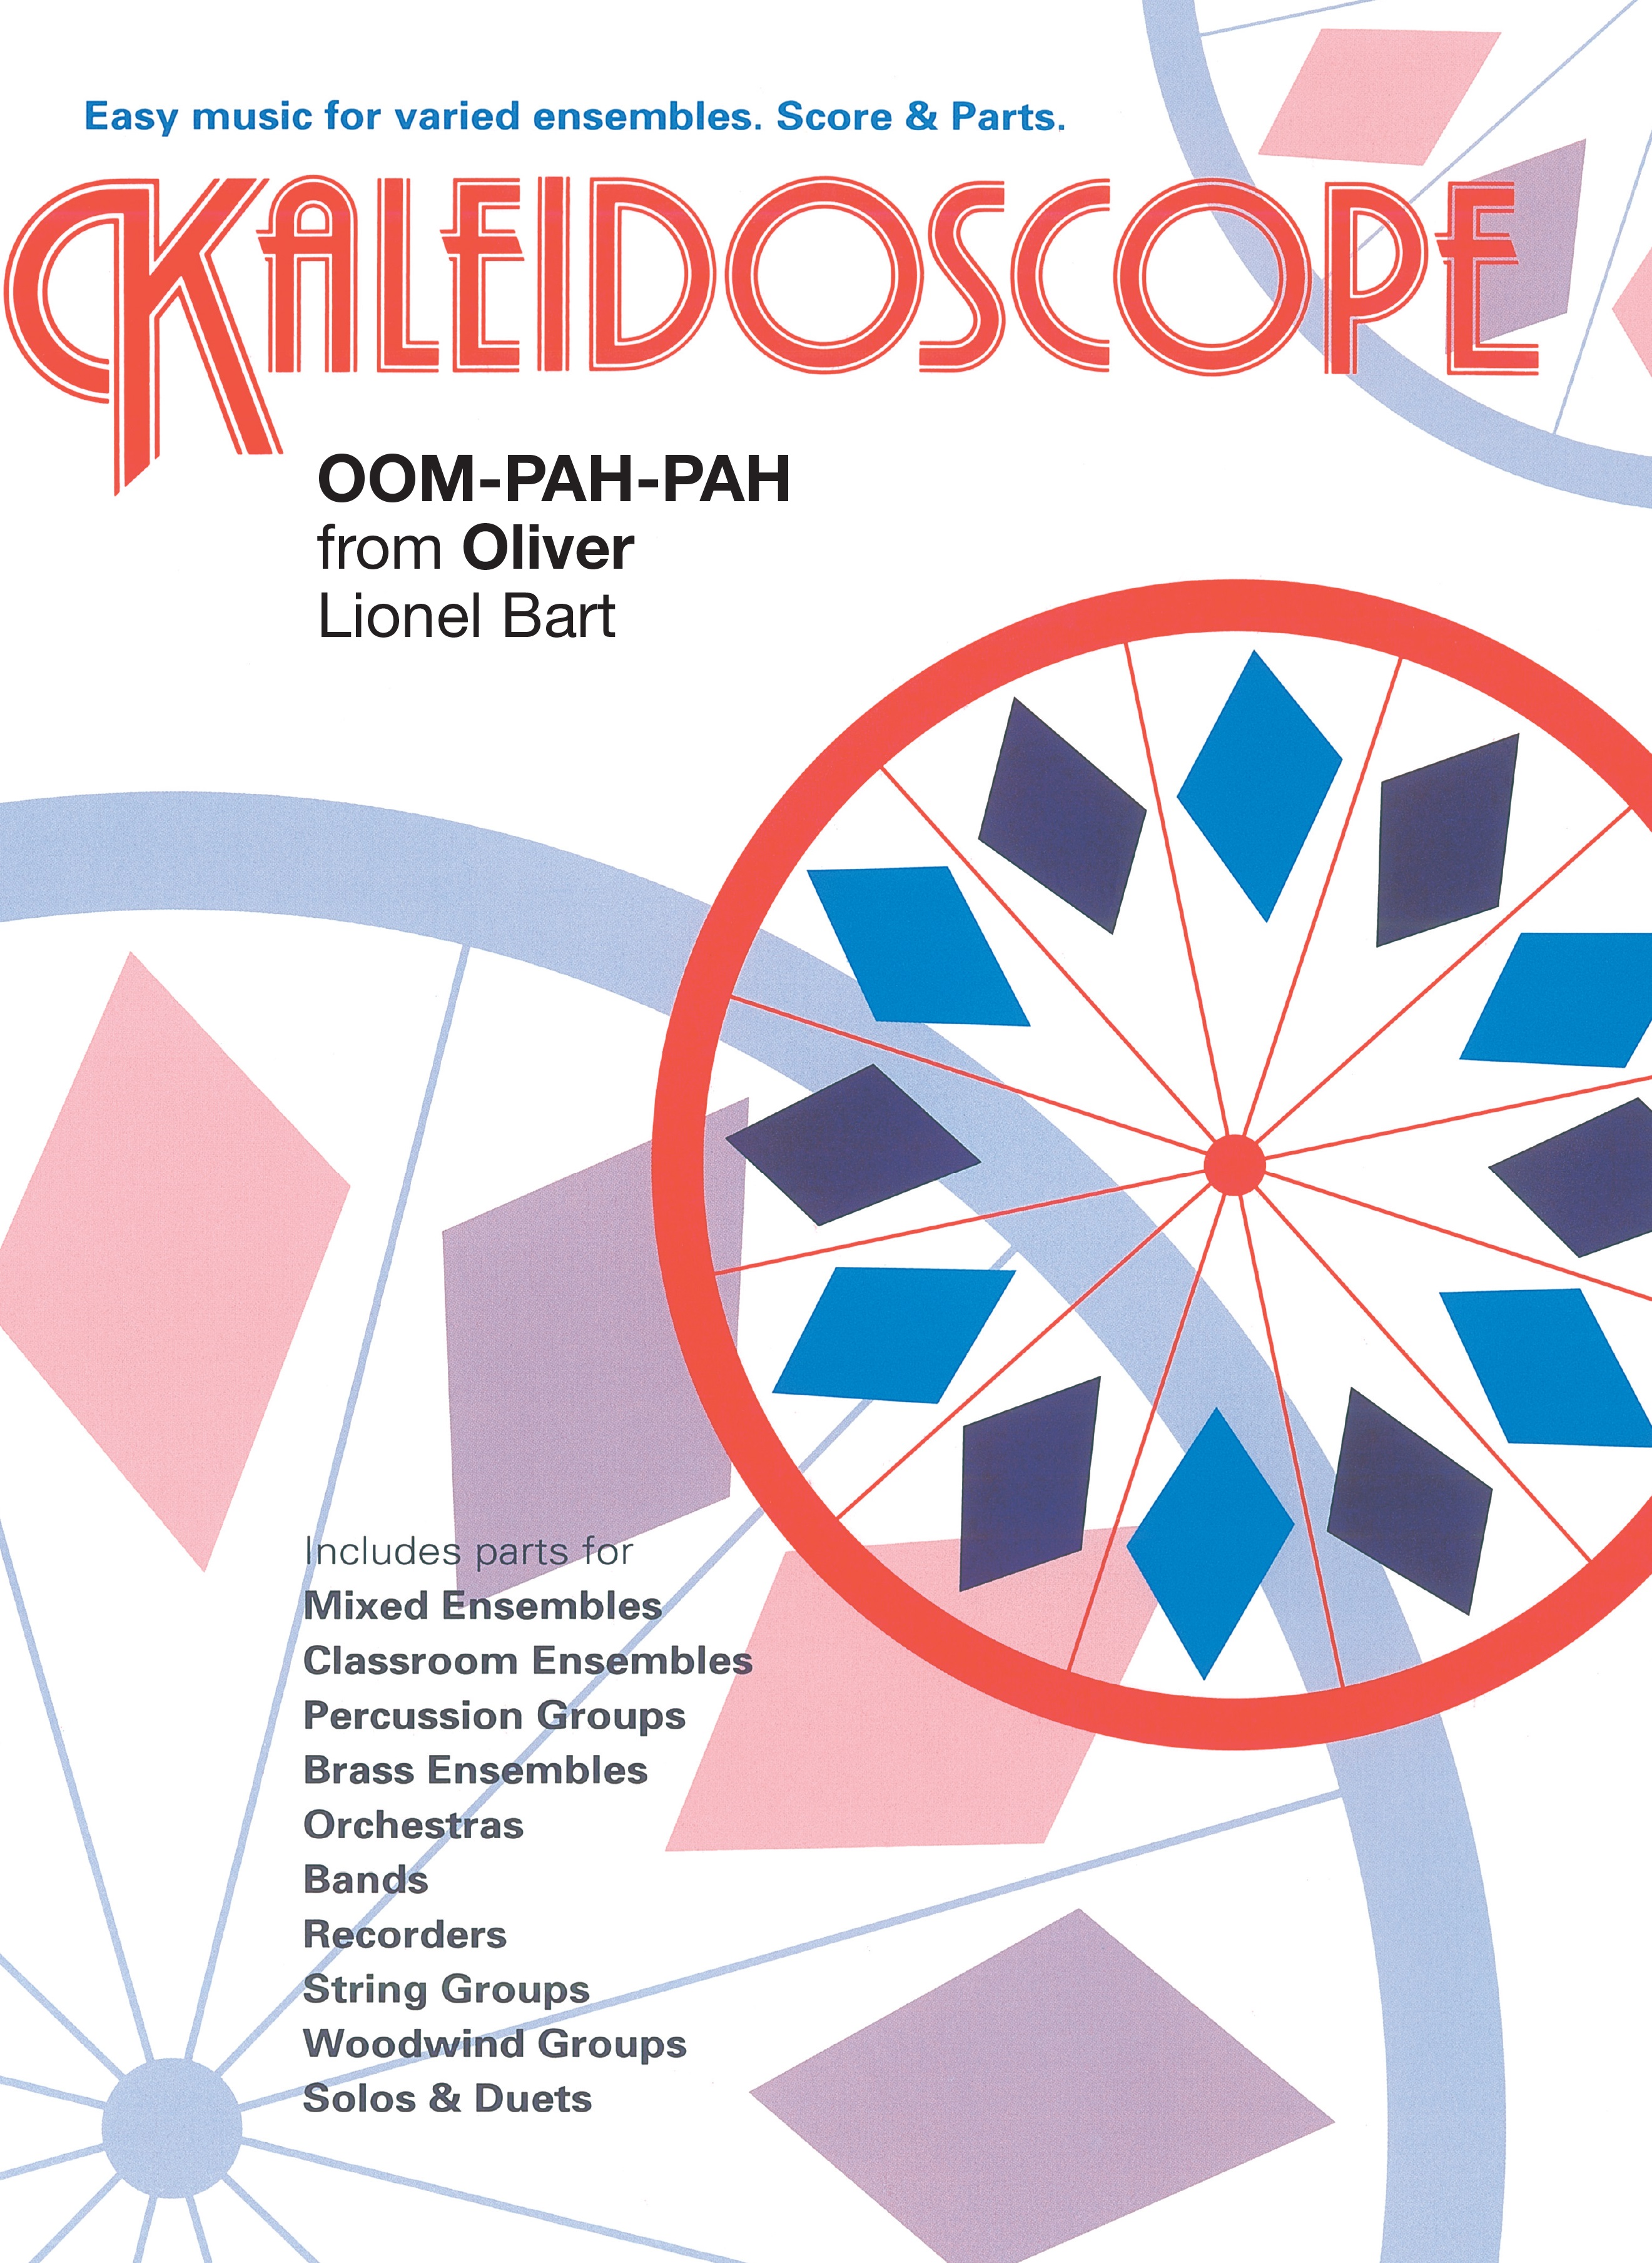 Lionel Bart: Kaleidoscope: Oom-Pah-Pah (Oliver): Flexible Band: Score and Parts